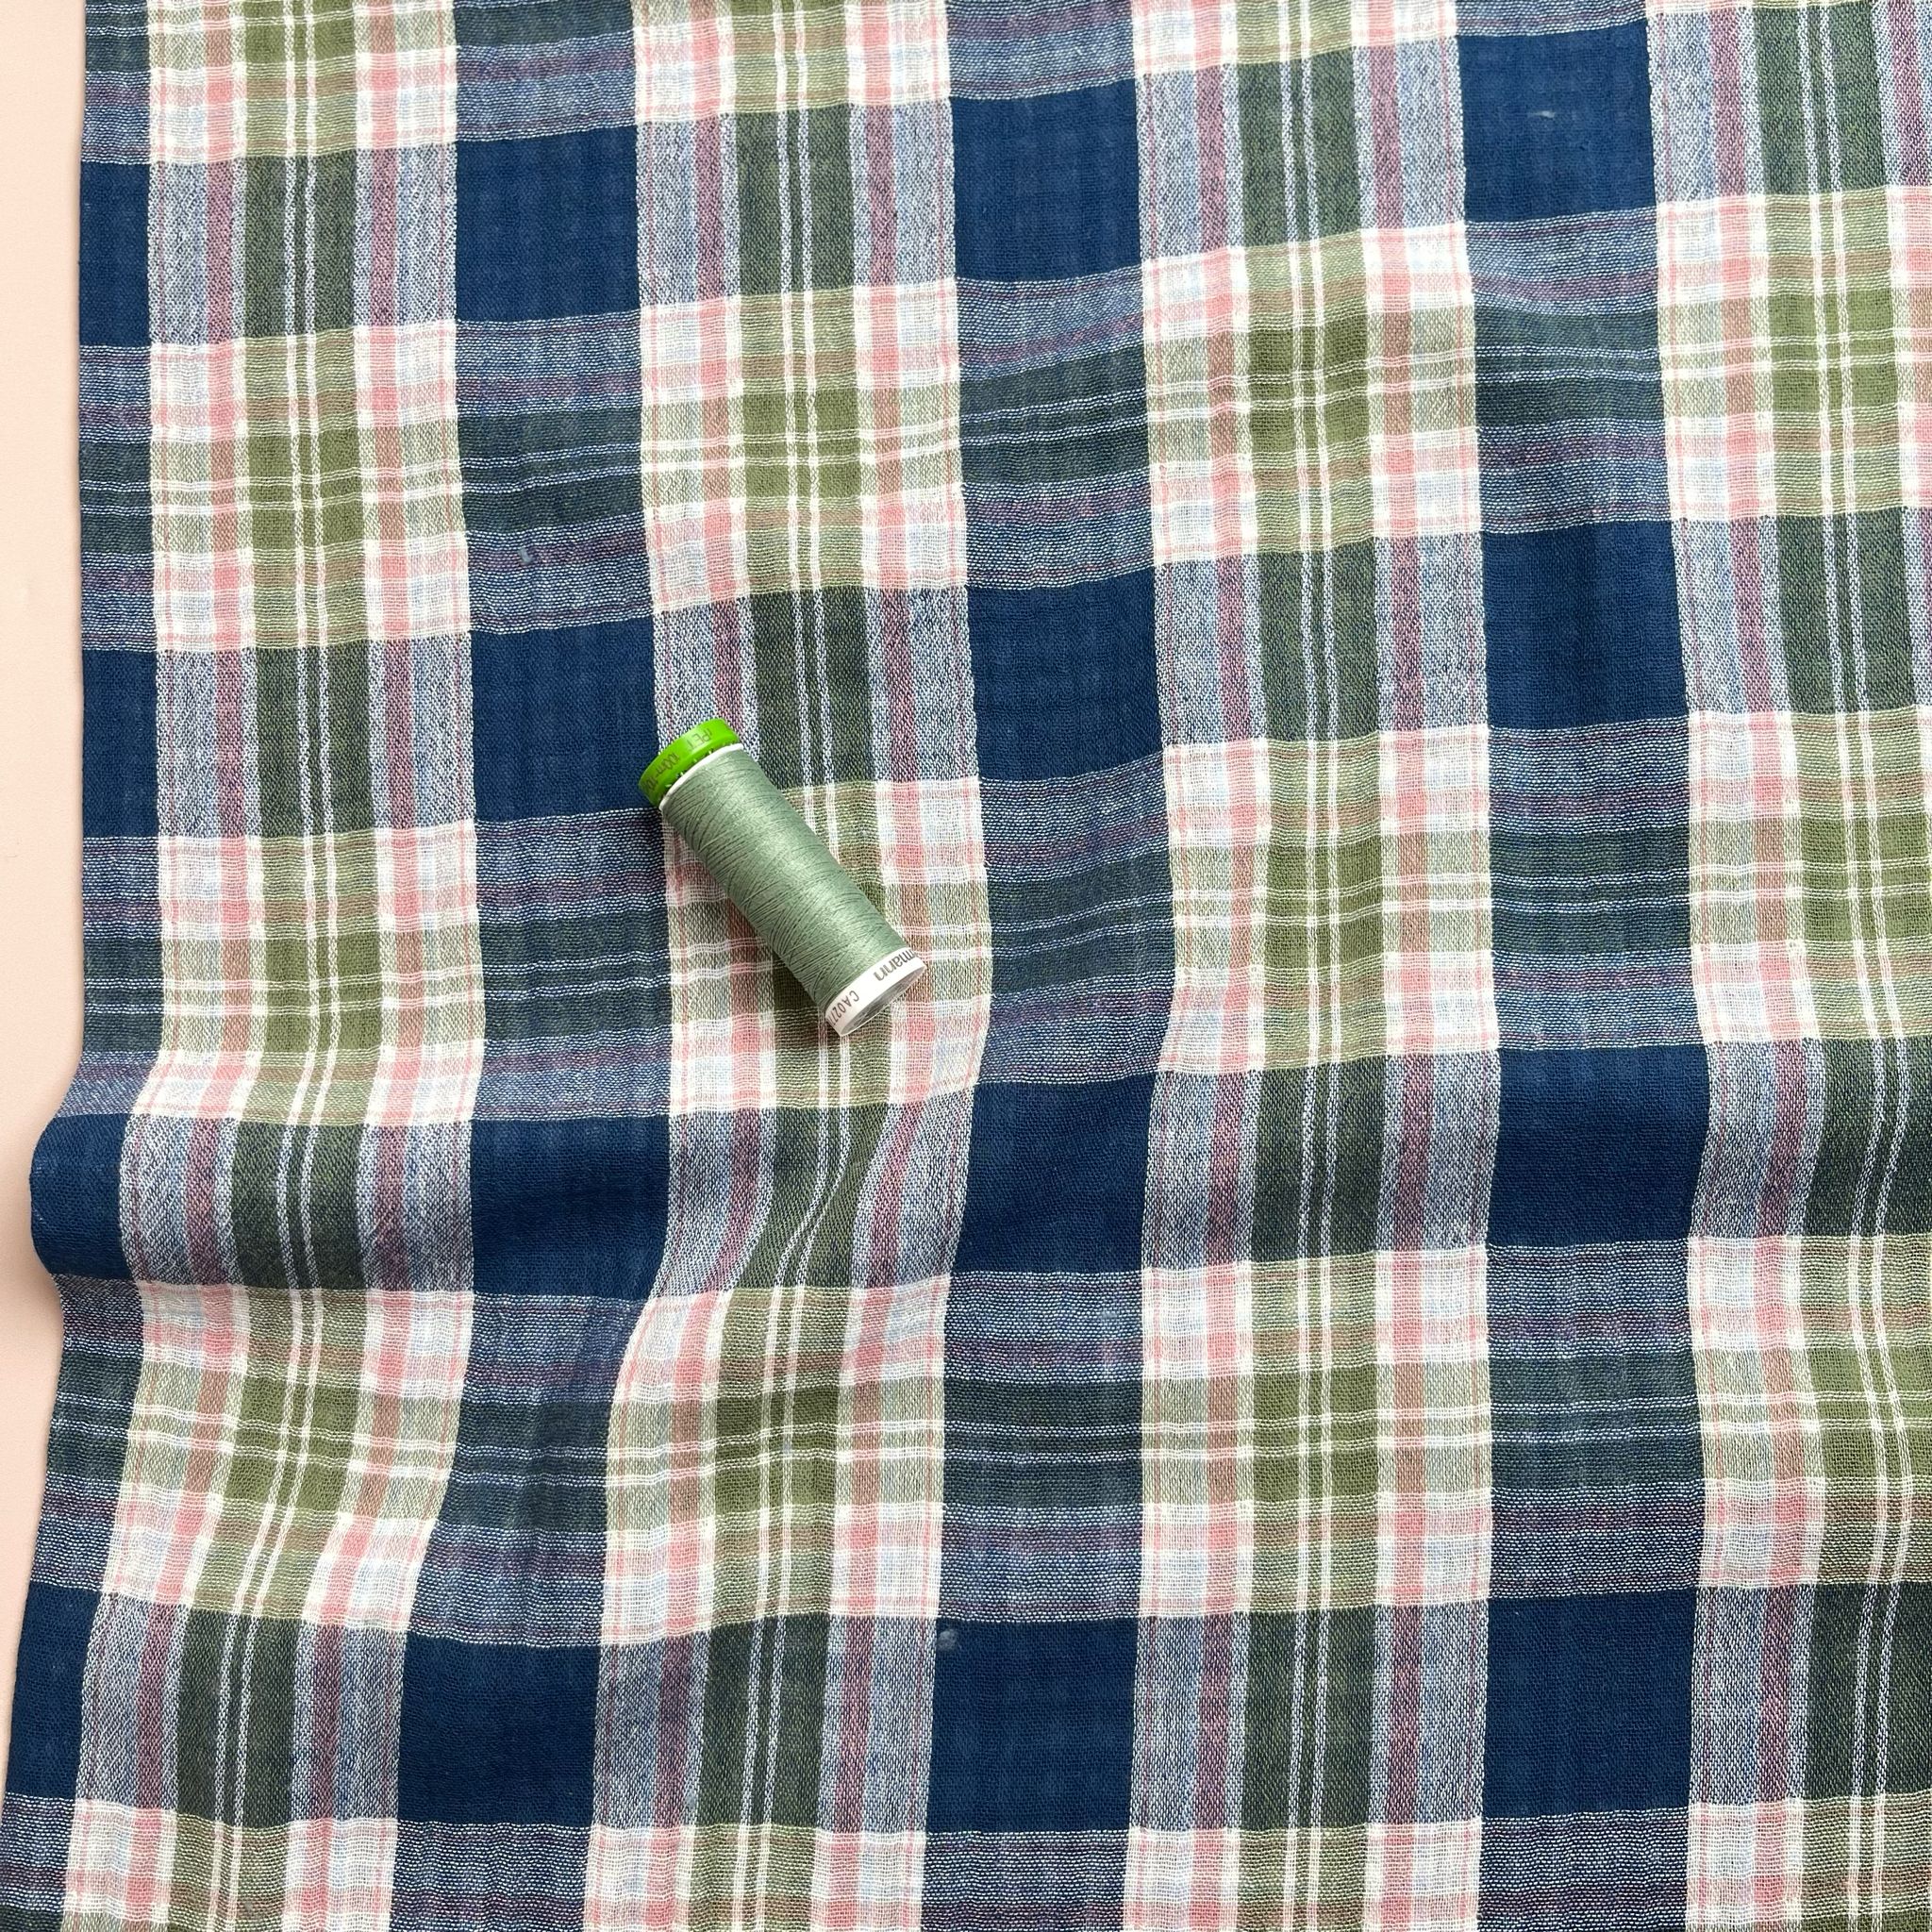 REMNANT 1.45 Metres - Reversible Grass Green Checked Cotton Double Gauze